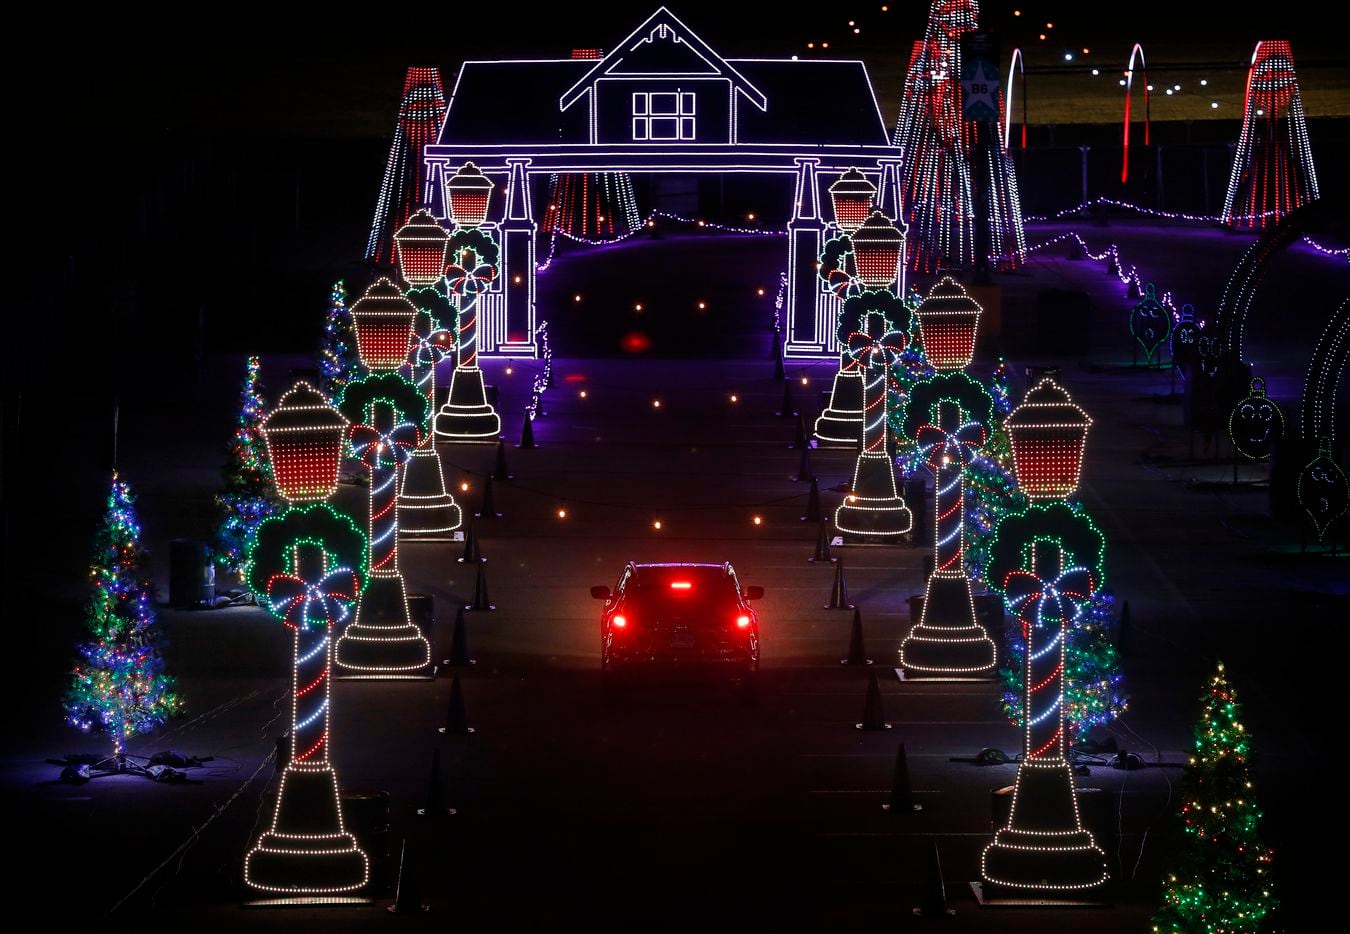 Grand Prairie's new drive-through holiday light display, the Light Park, features a 1-mile display synced to Christmas music at Lone Star Park.